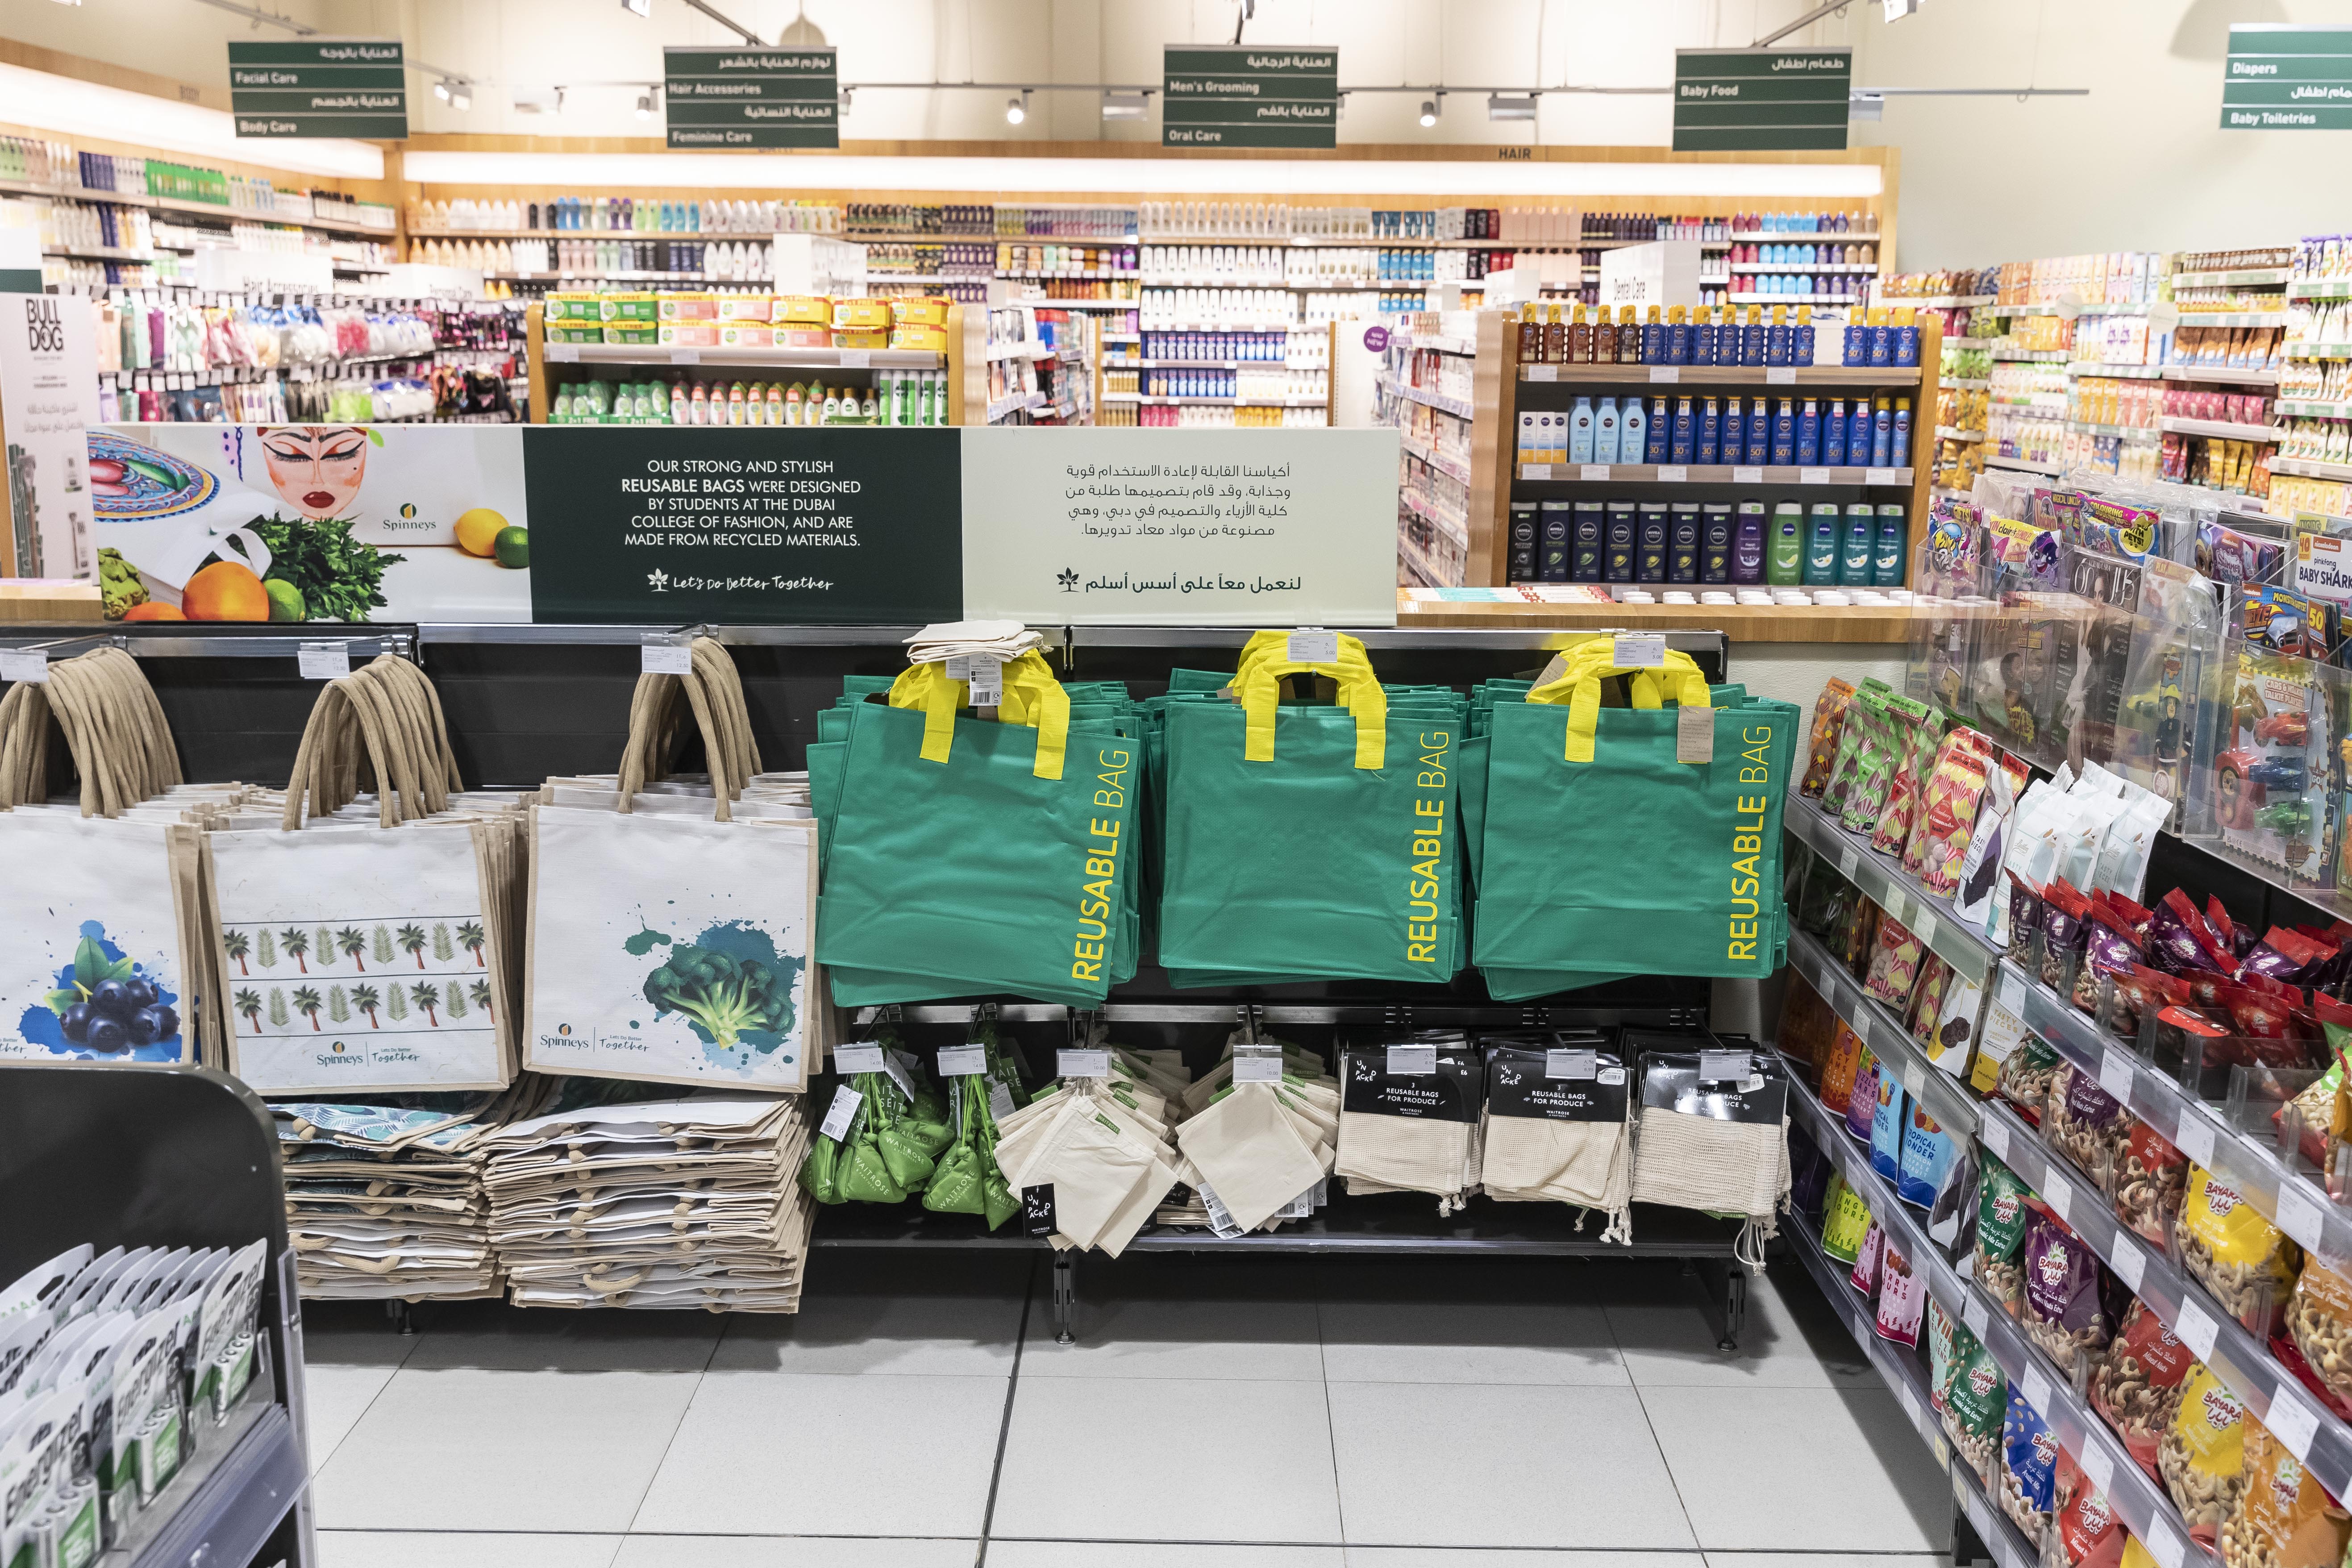 Abu Dhabi shoppers on board with plastic bag phase-out